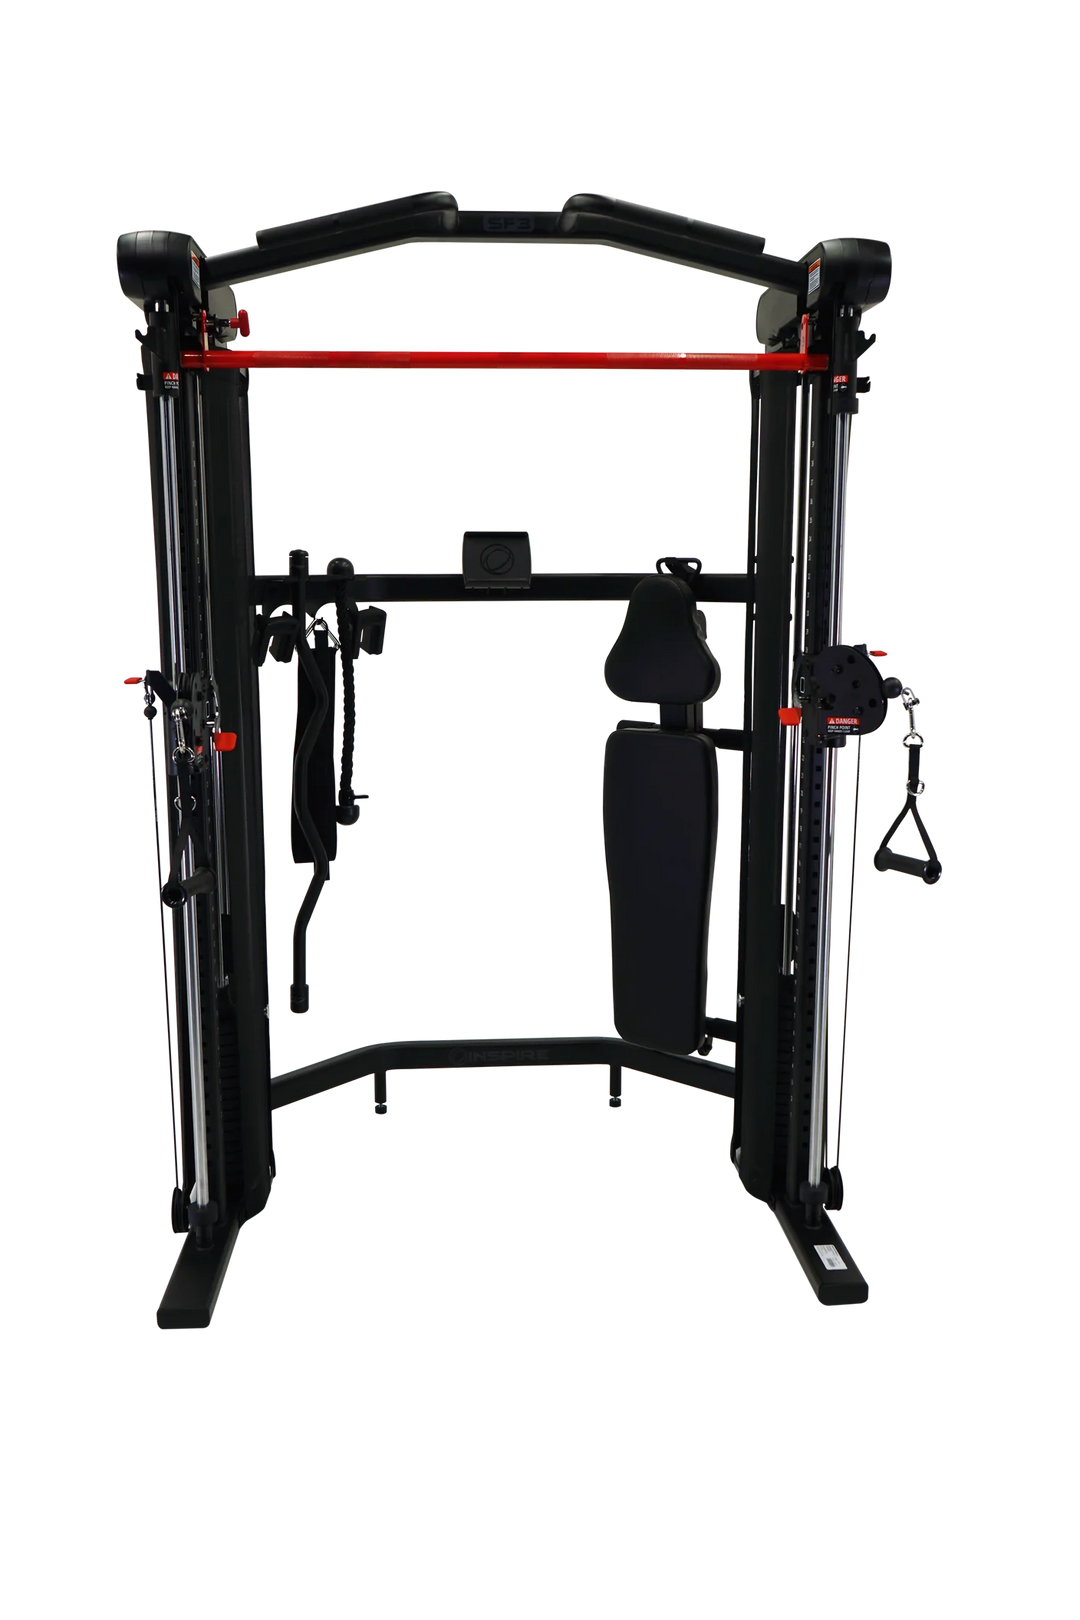 Inspire SF3 Functional Trainer